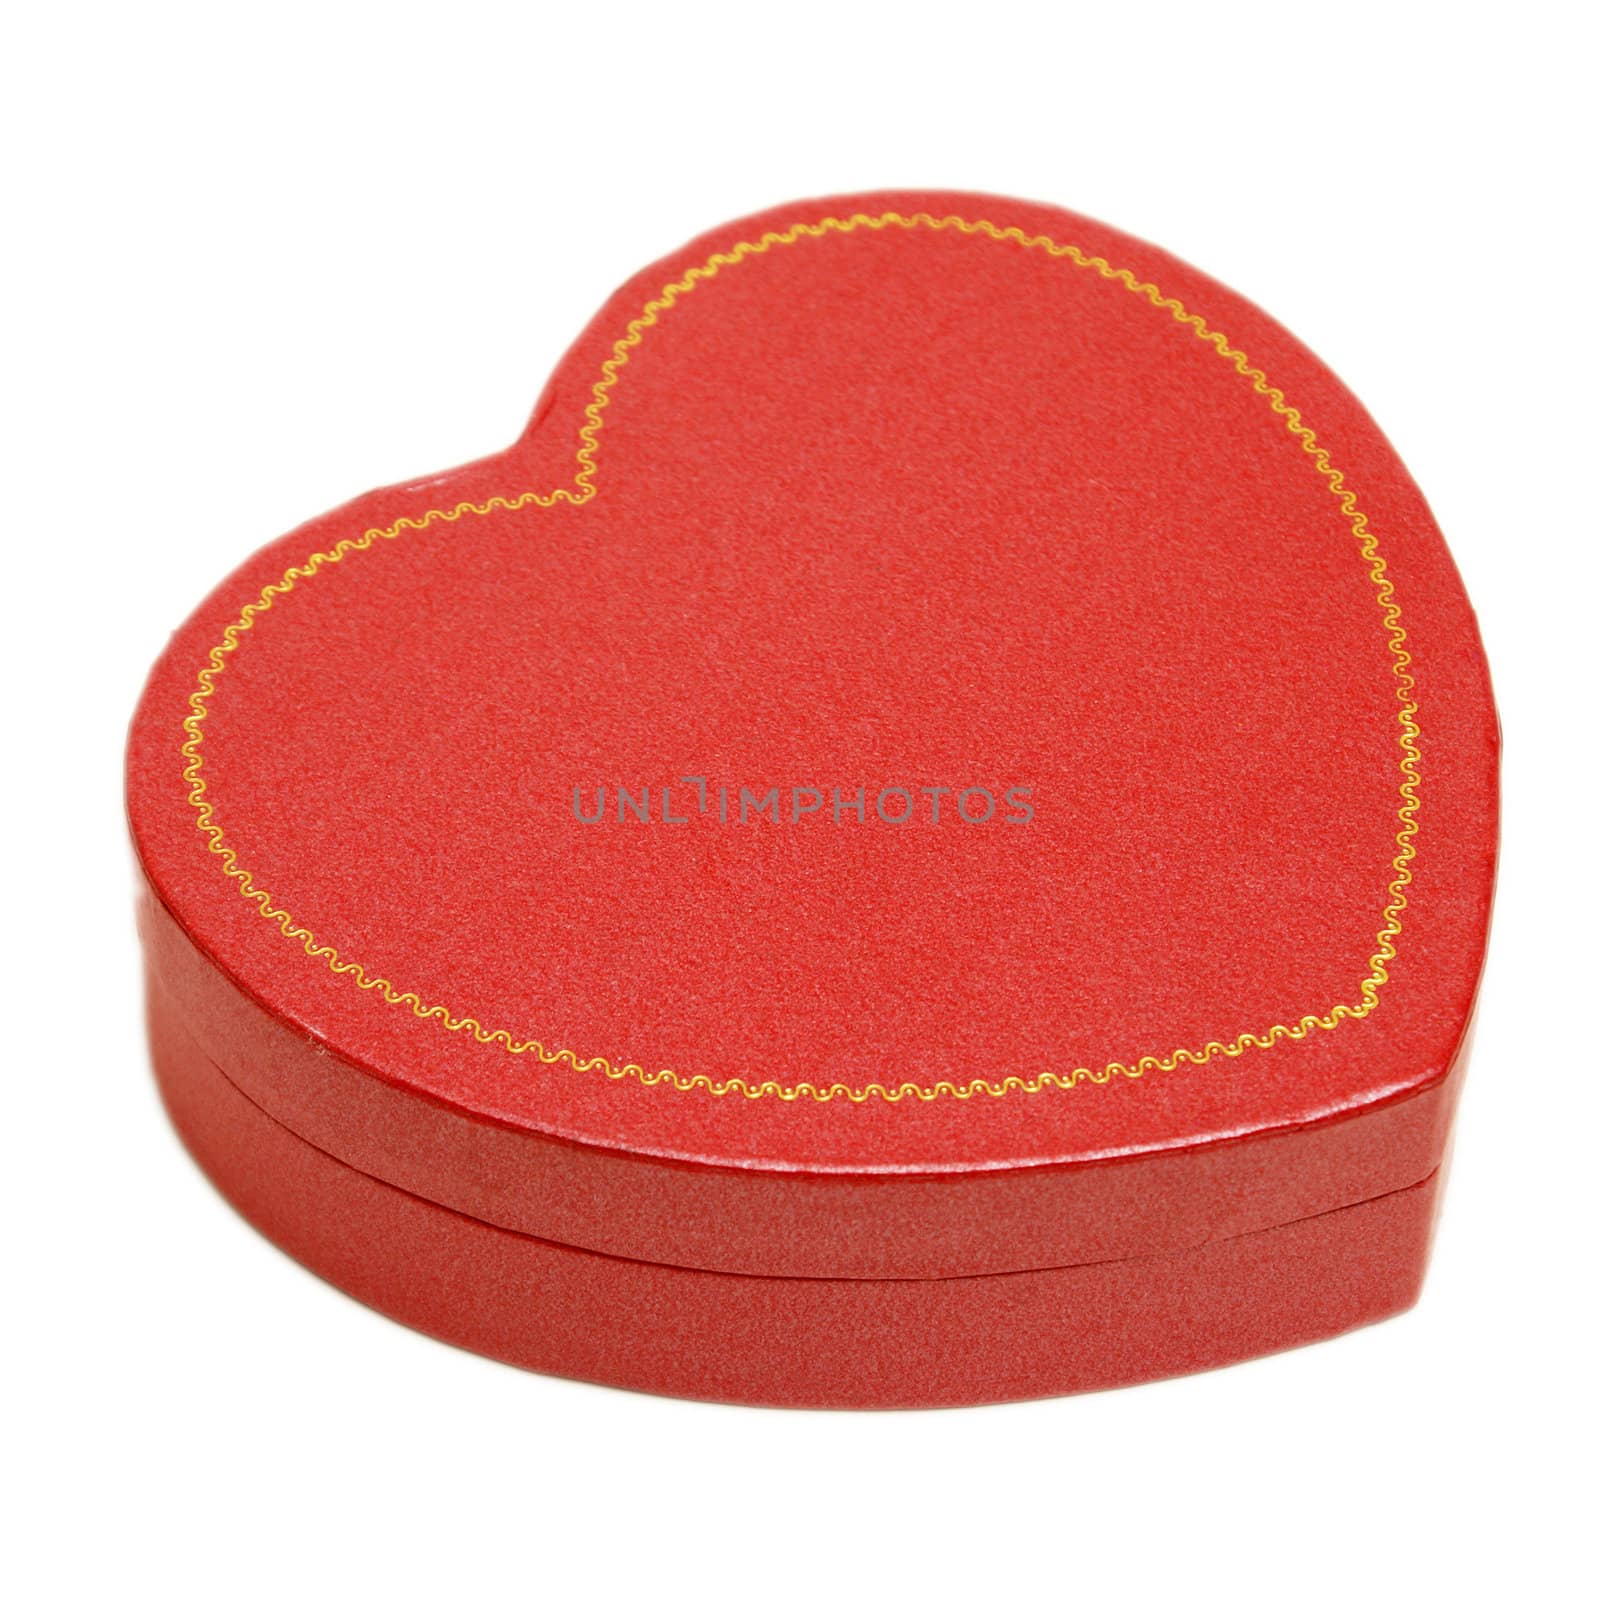 An isolated shot of a red heart shaped box.